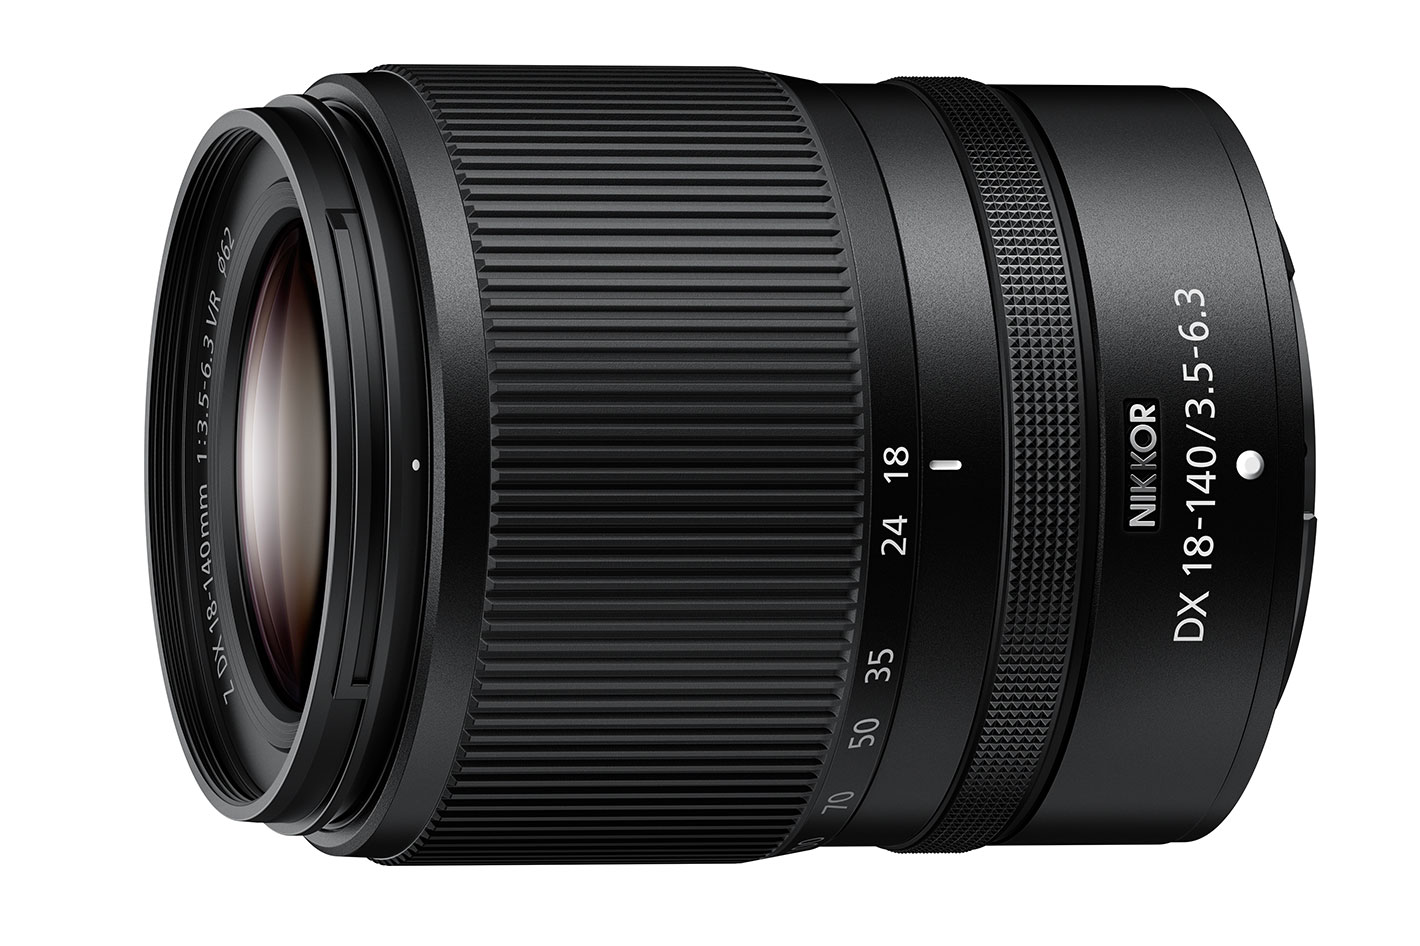 NIKKOR Z DX 18-140mm f/3.5-6.3 VR, a compact high-power zoom lens